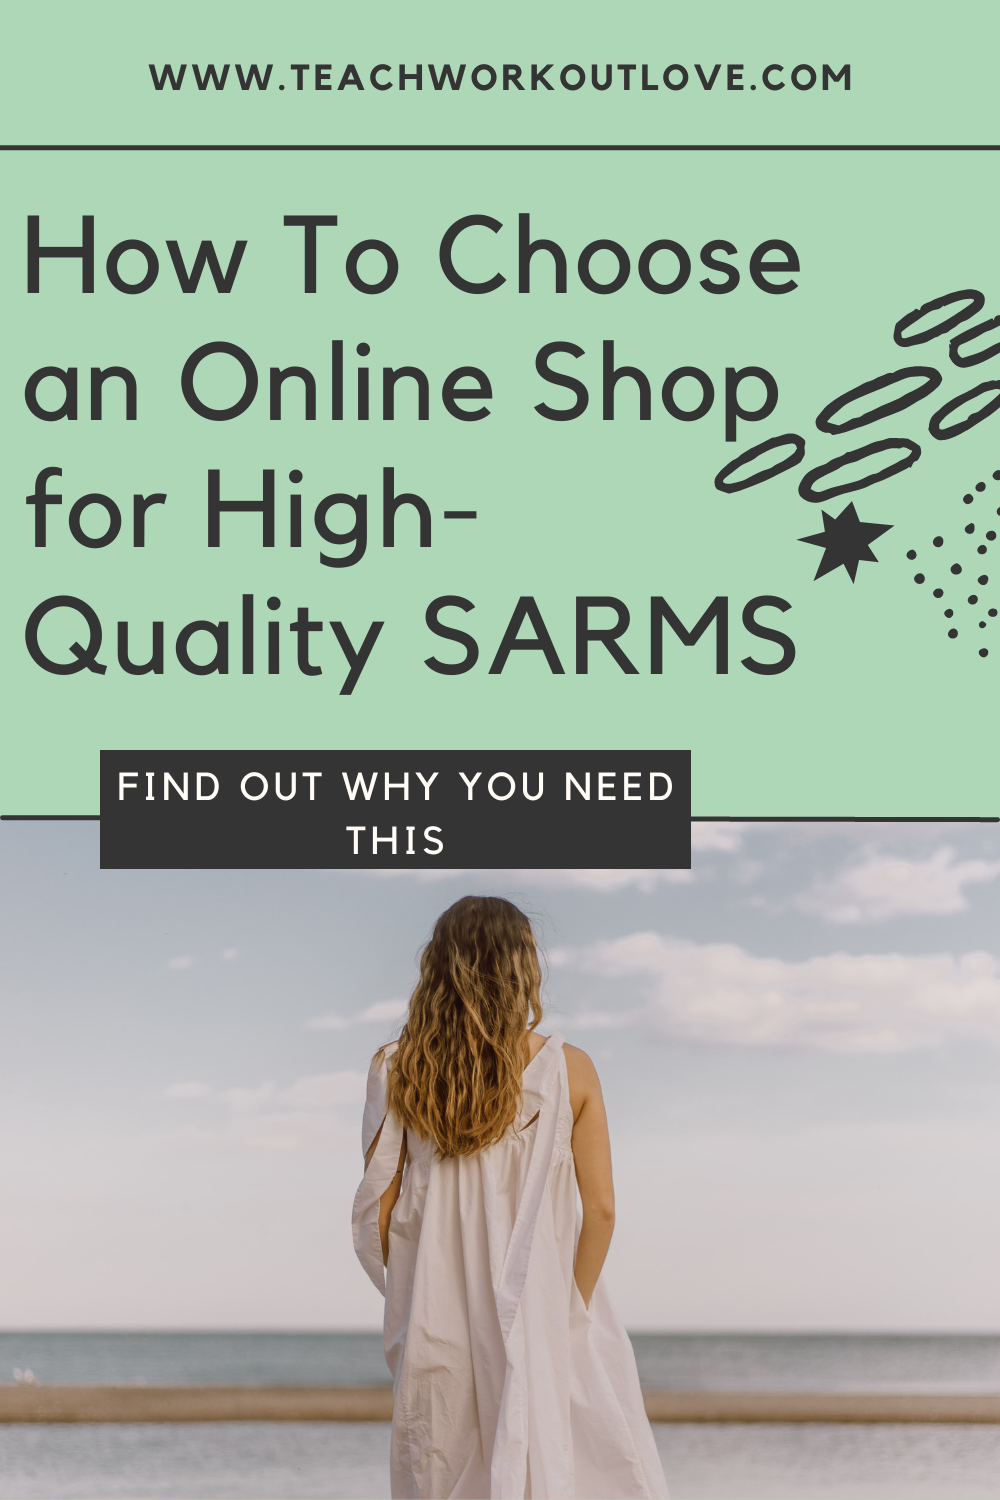 SARMS and peptides from shady online websites can turn out to be terrible and dangerous for your health. Here's how to choose what is best.